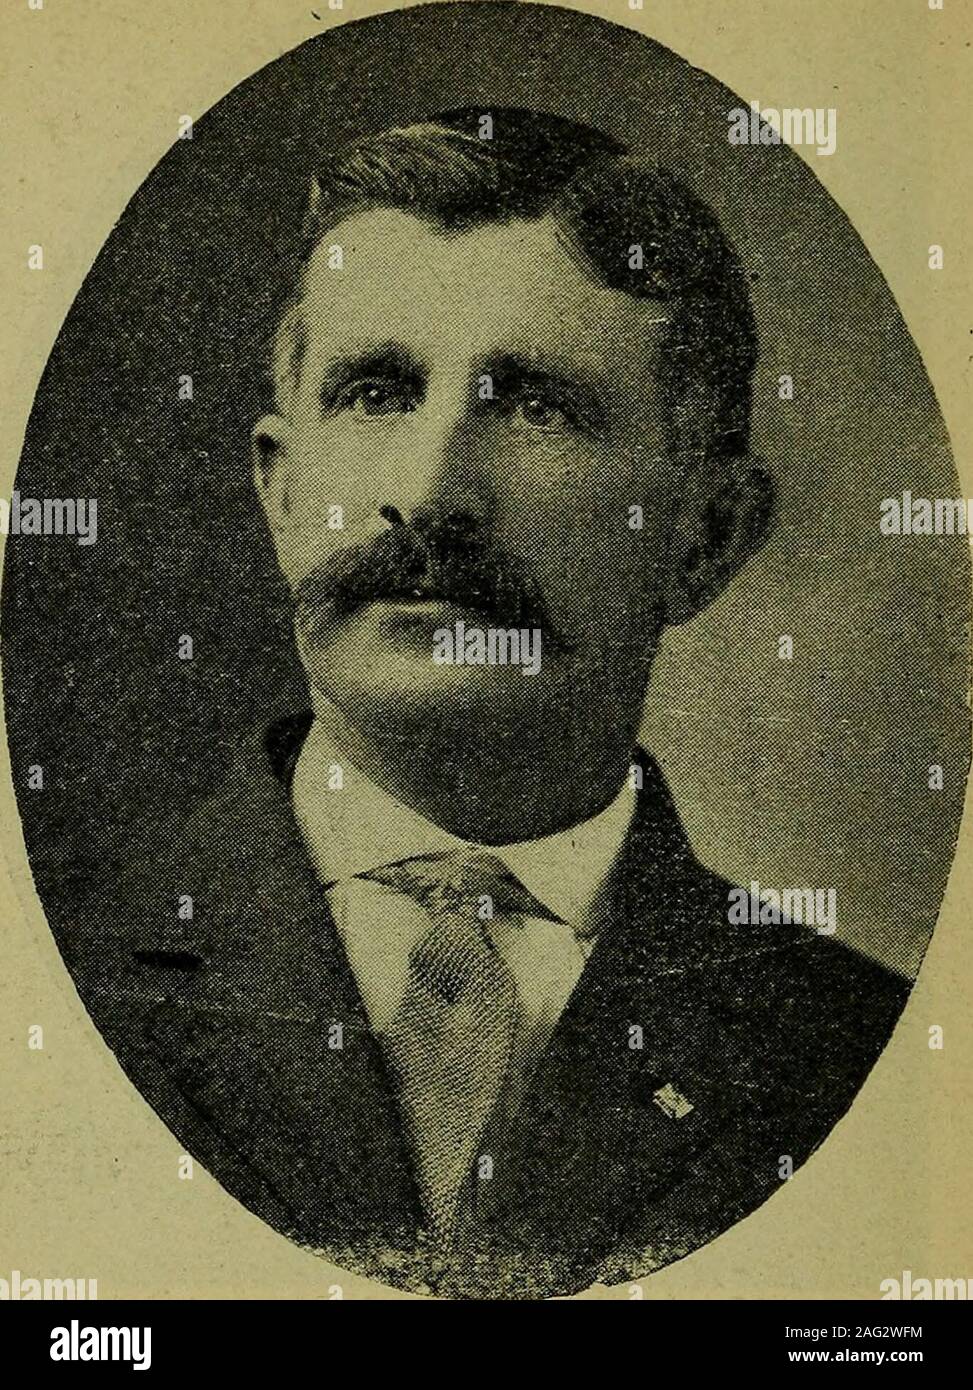 . Who's who in state politics. OHEARN, WILLIAM A., 2d Berkshire,Dem., North Adams. Born North Adams,March 8, 1887; Drury high school, NorthAdams, Georgetown university 1909. Law-yer. Elks, K. C, A. O. H. Special agent inCalifornia for Department of Interior inGeneral Land Office service, congressionalprivate secretary. House 11, legal affairs, elections. 2*9. OLEARY, JEREMIAH, 9th Norfolk,Dem., Sharon. Born there Dec. 12, 1861;public schools. Contractor. M. C. O. F. (C.R.), A. O. H., Dem. town committee 20years (ch. 8 years). House 11, counties. 250 Stock Photo